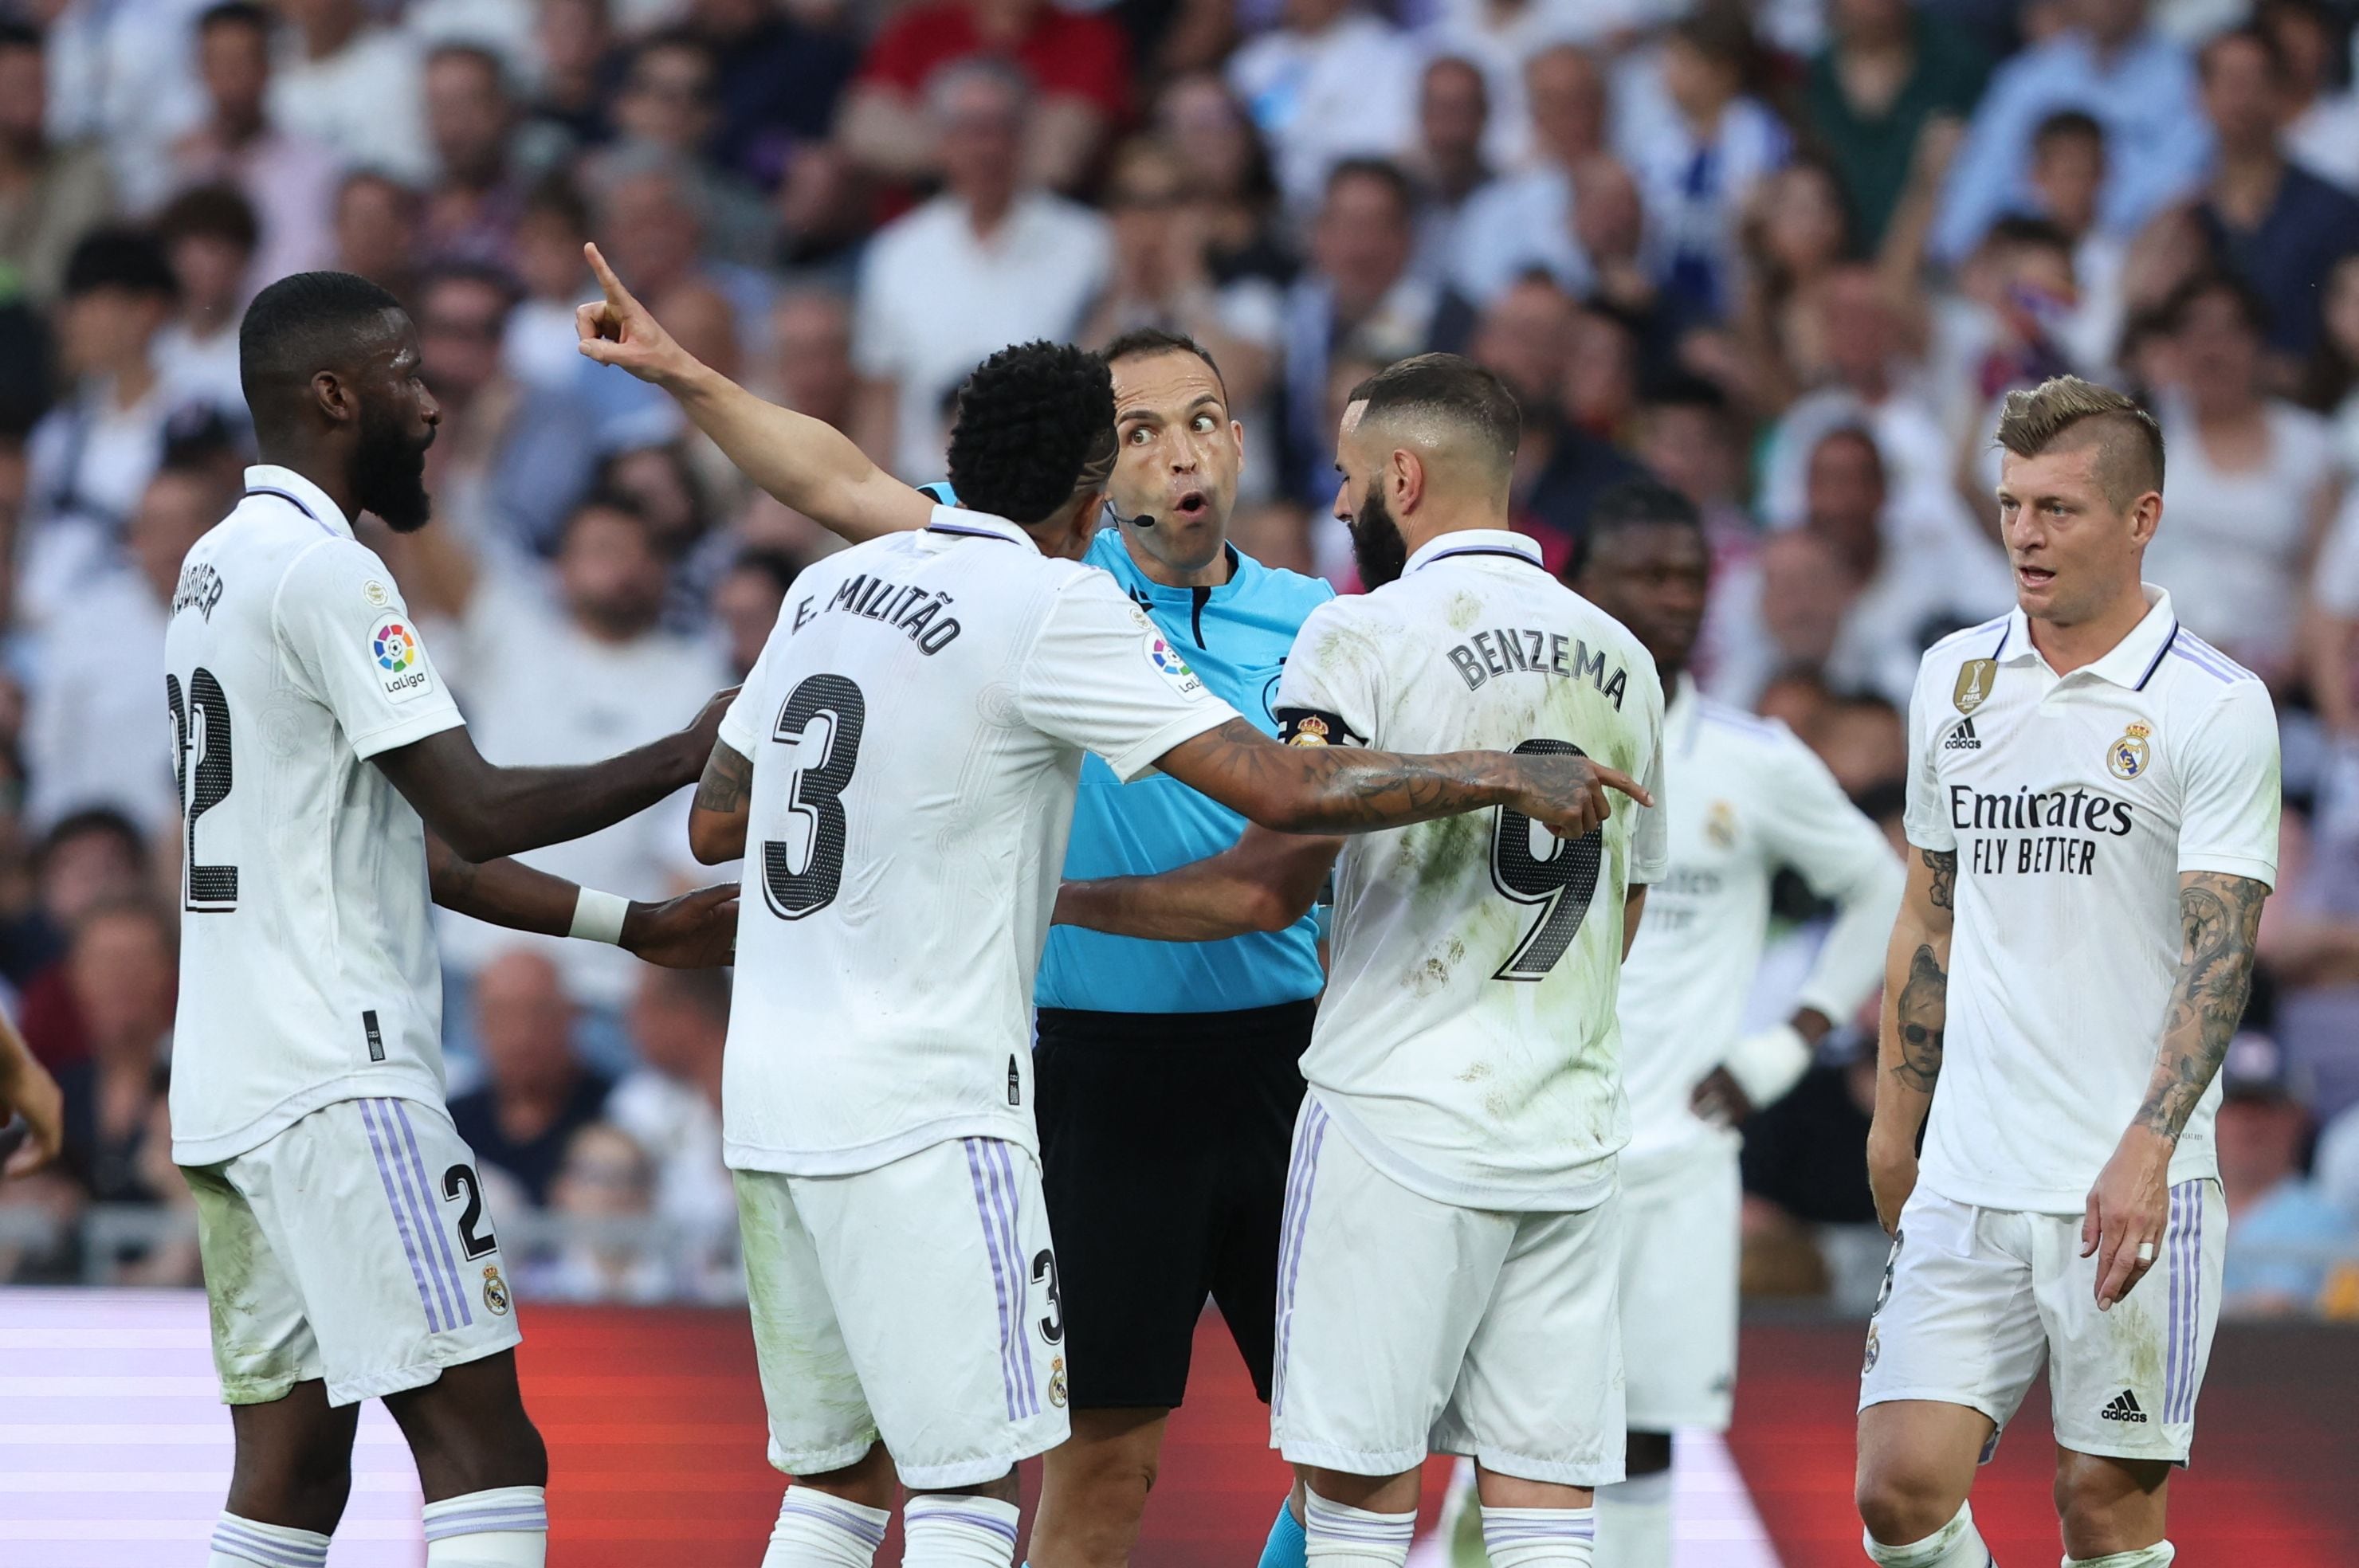 (From L) Real Madrid's German defender Antonio Rudiger, Real Madrid's Brazilian defender Eder Militao, Real Madrid's French forward Karim Benzema and Real Madrid's German midfielder Toni Kroos talk with Spanish referee Guillermo Cuadra Fernandez during the Spanish league football match between Real Madrid CF and UD Almeria at the Santiago Bernabeu stadium in Madrid on April 29, 2023. (Photo by Thomas COEX / AFP)